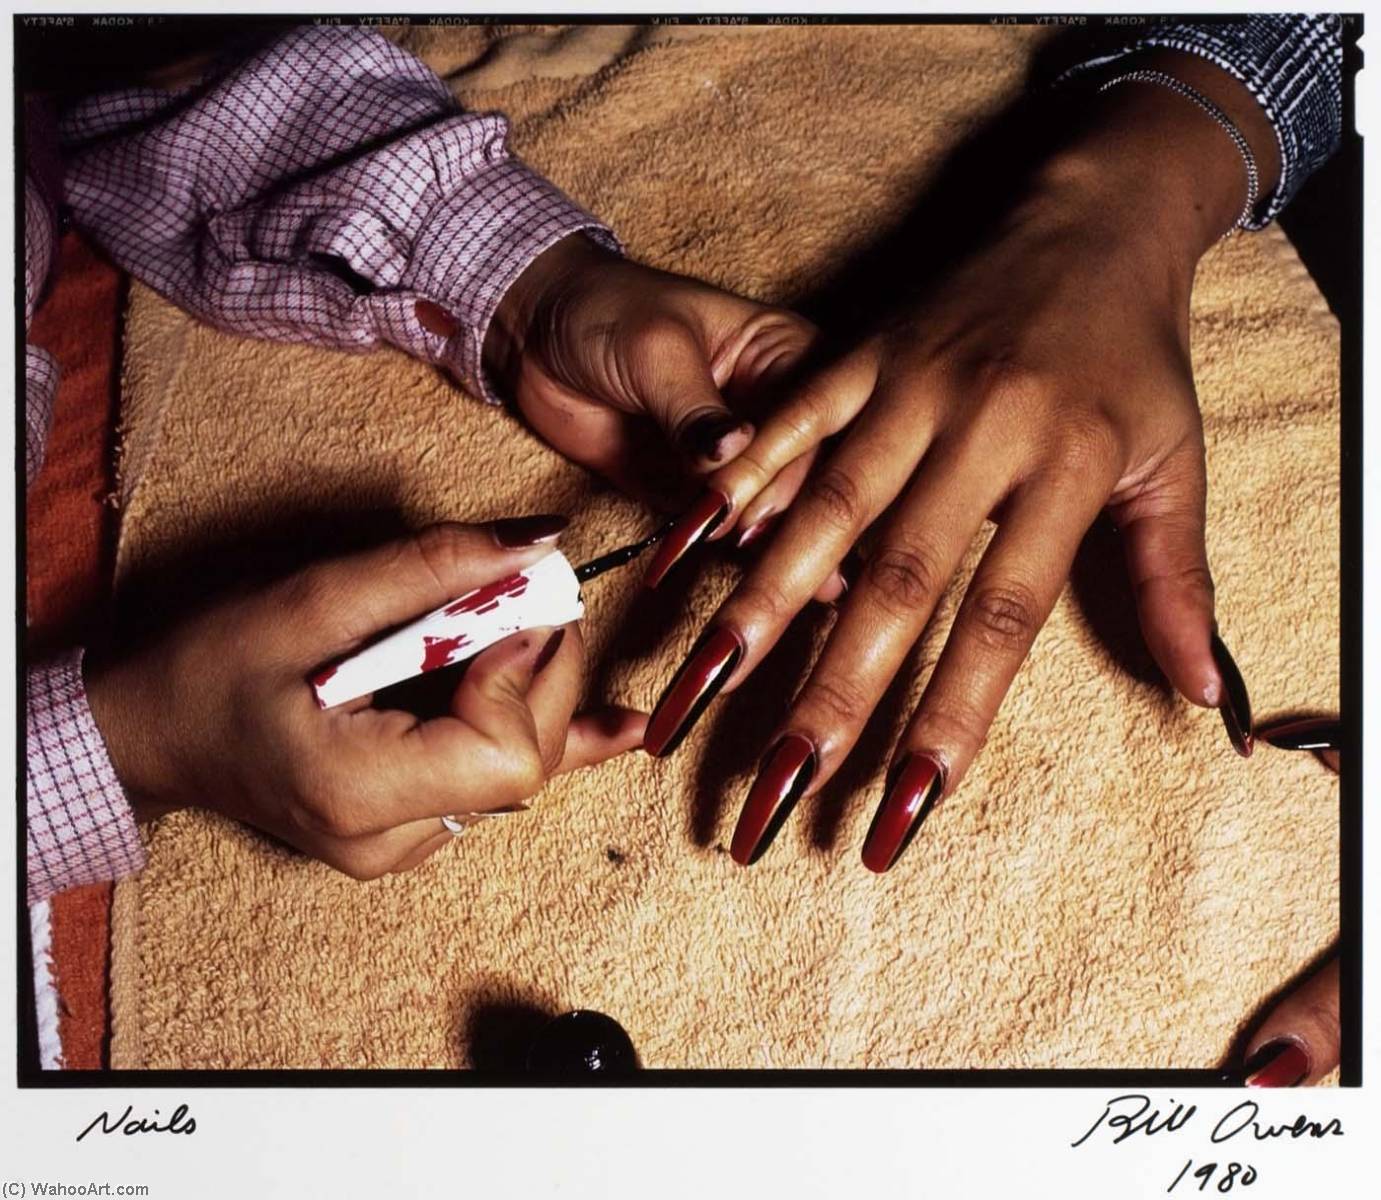 WikiOO.org - 백과 사전 - 회화, 삽화 Bill Owens - Nails, from the Los Angeles Documentary Project